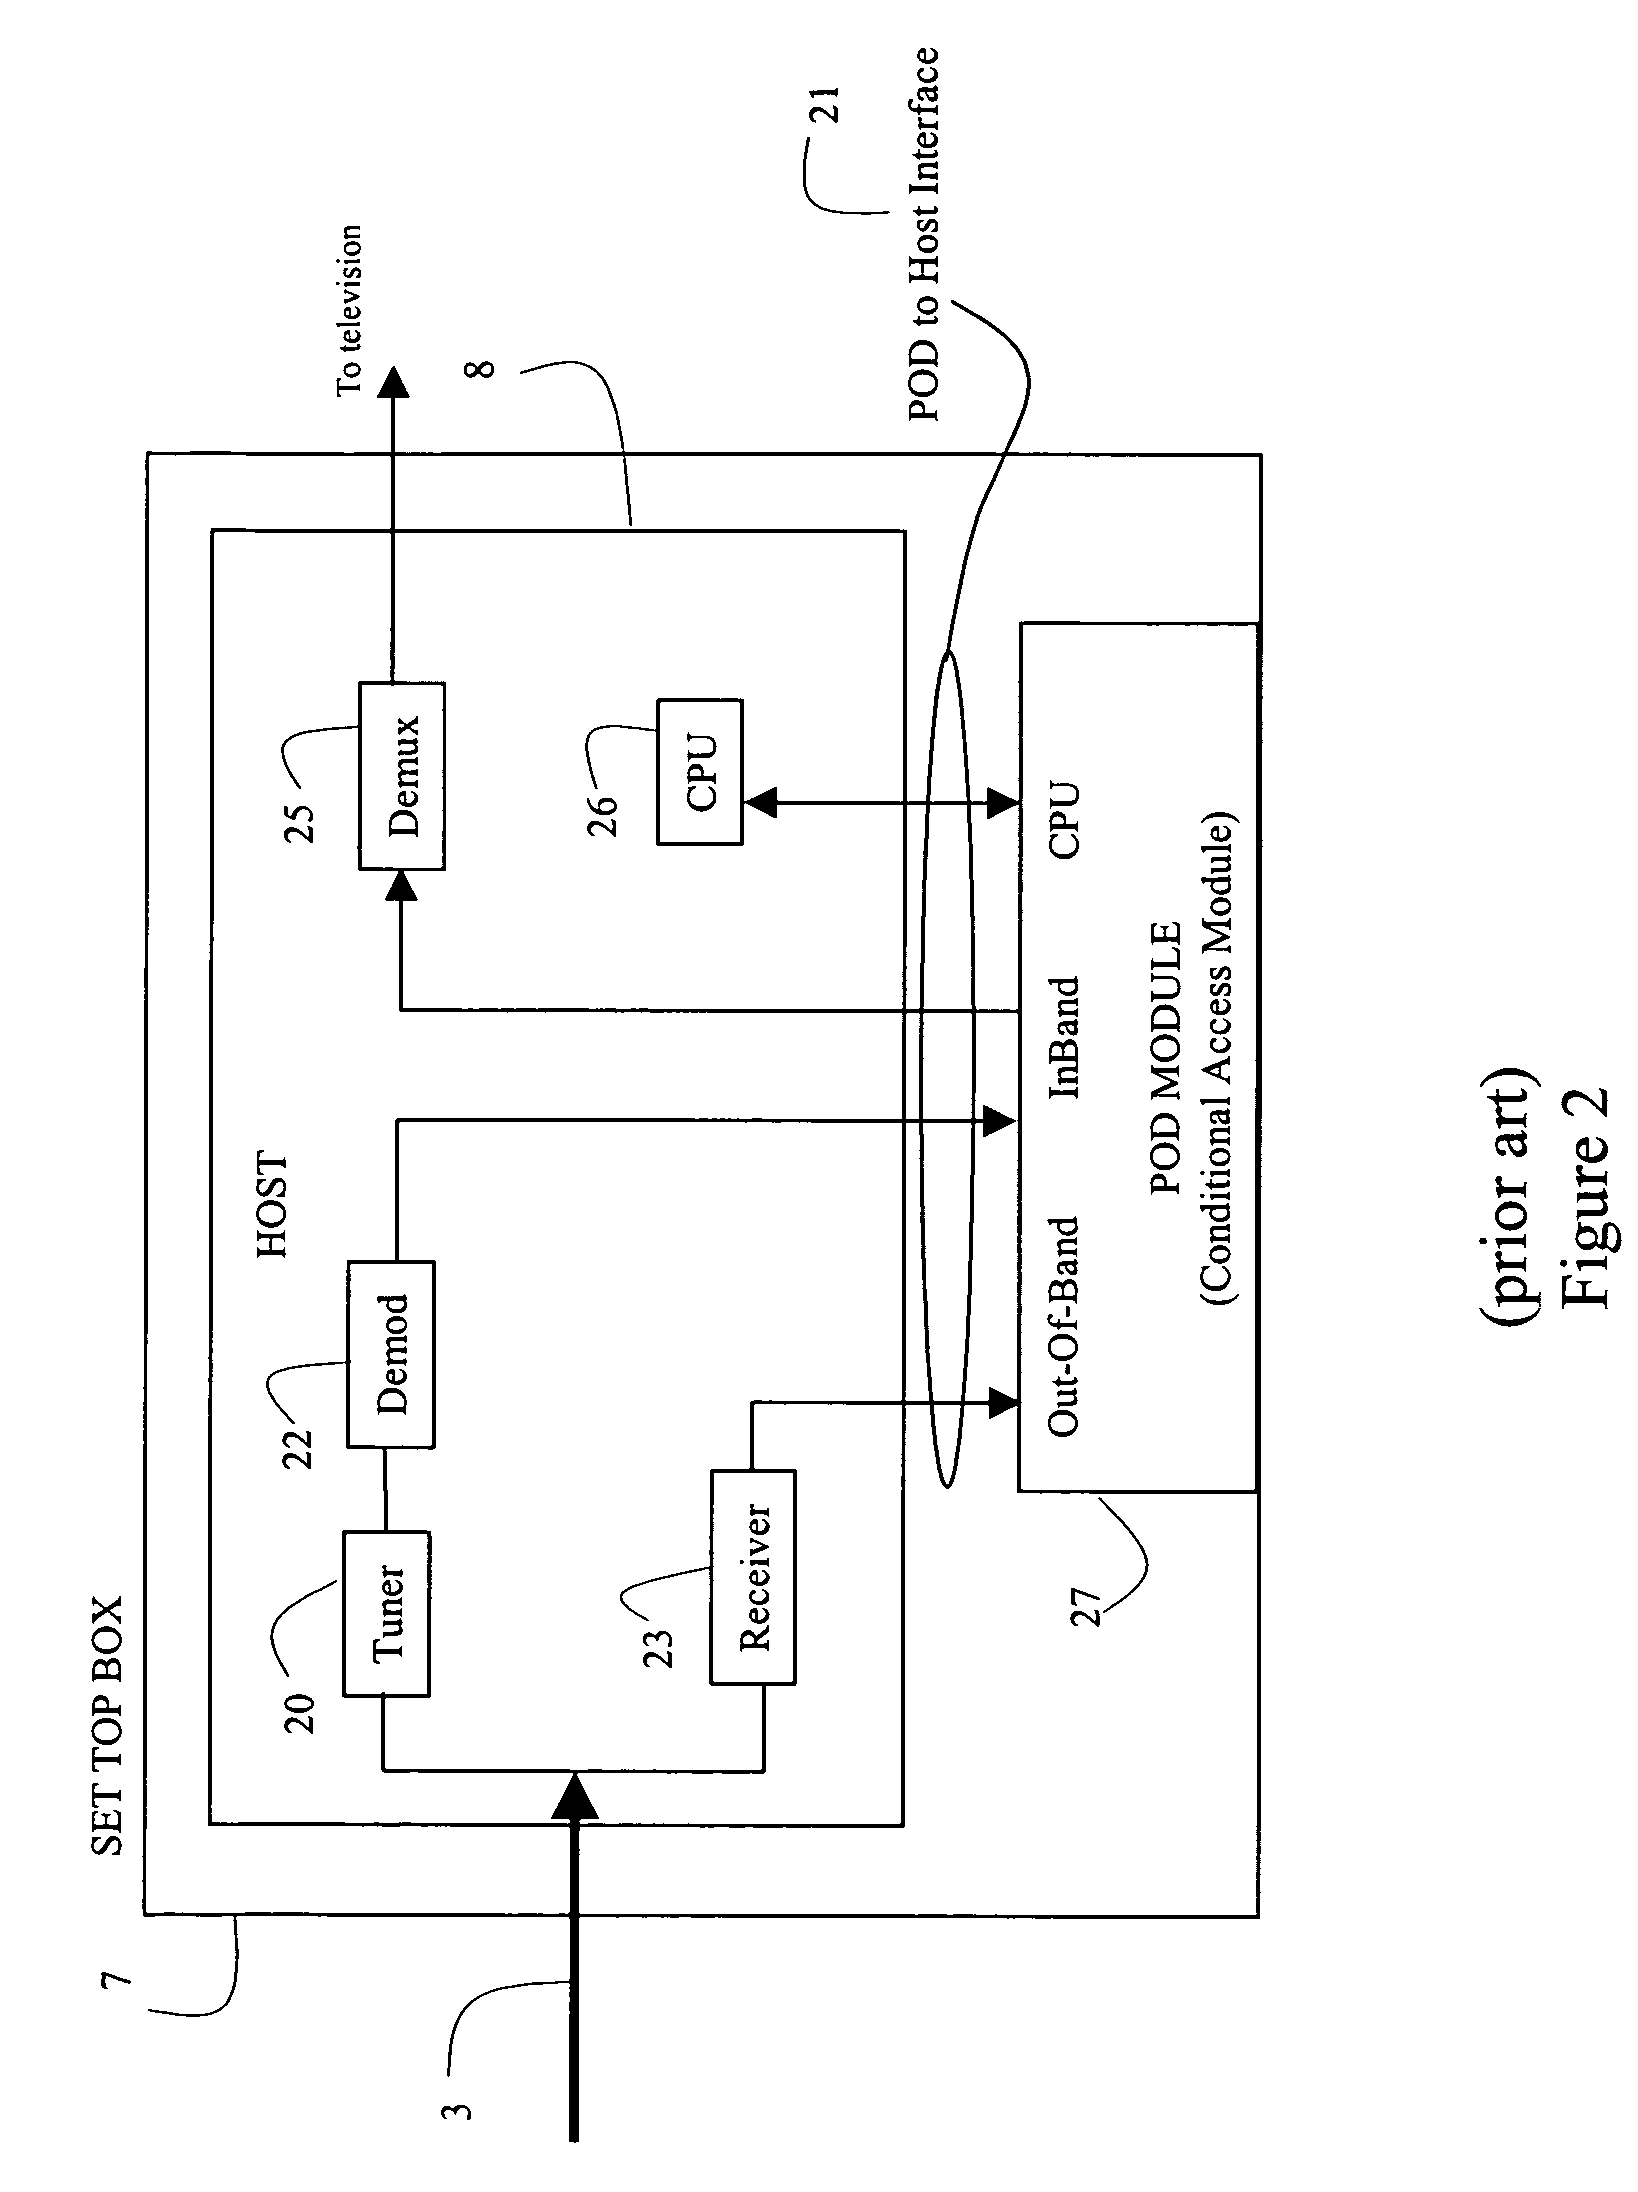 Systems and methods for provisioning a host device for enhanced services in a cable system